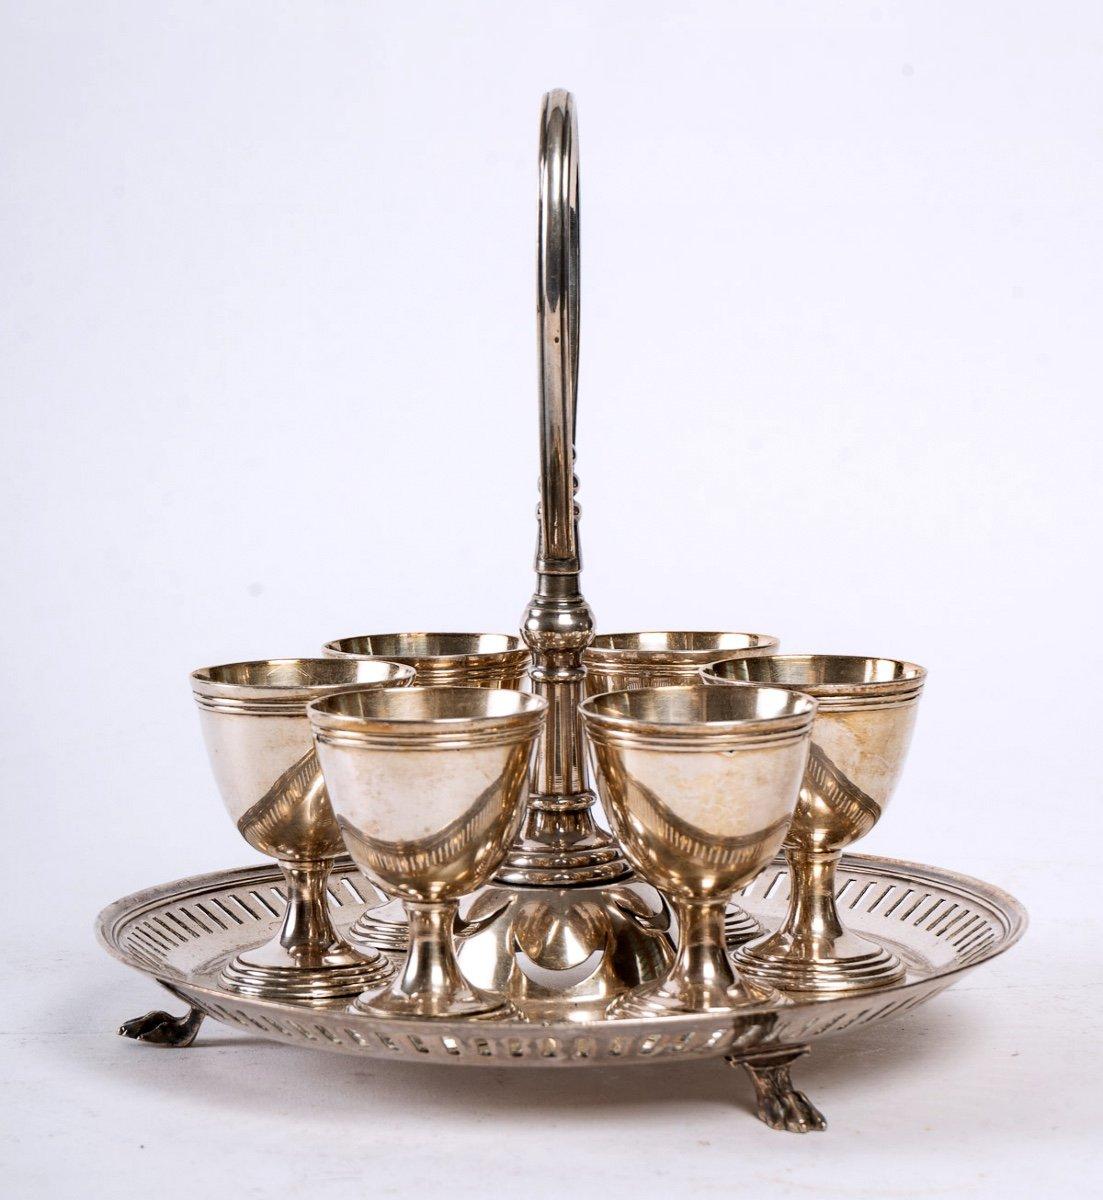 Antique Napoleon III silver-plated egg stand, by Christofle, round shape and standing on 3 claw feet, with a grip.
In perfect condition.
It presents 6 egg cups on feet.
19th century
Dimensions: Height: 23cm x diameter: 20cm
Egg cup dimensions: